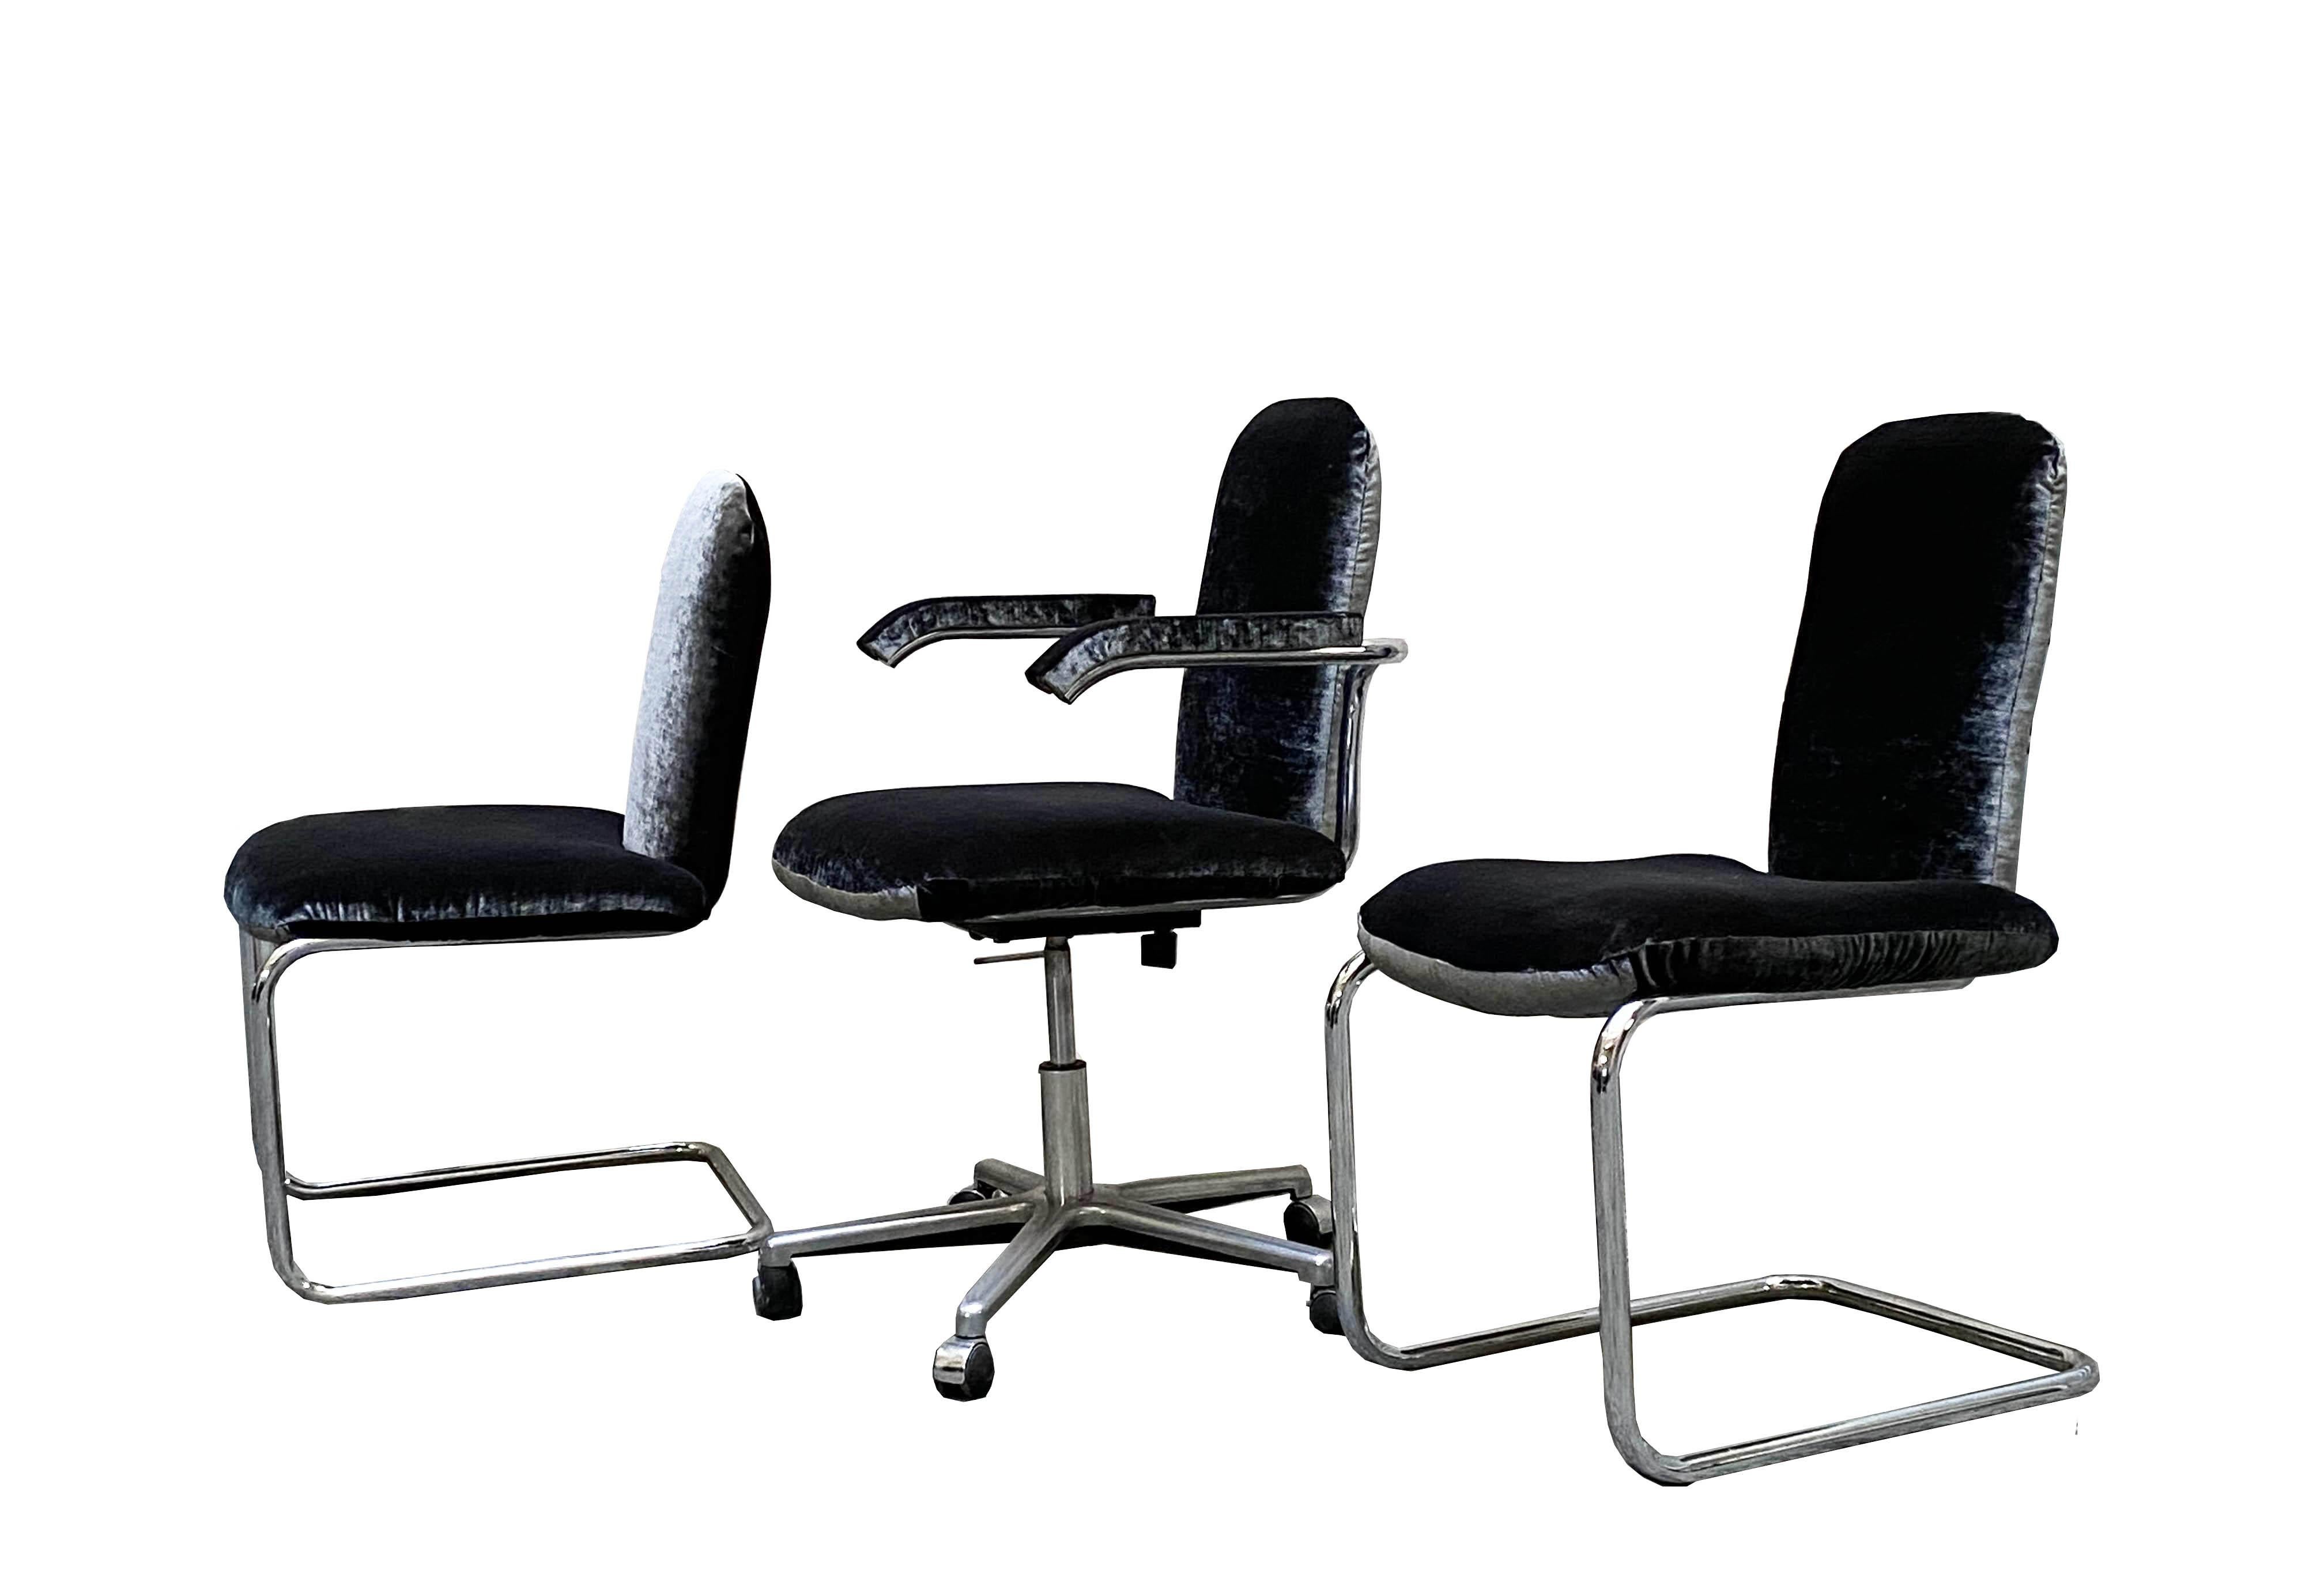 Beautiful and rare set of 3 chairs designed by Kazuhide Takahama for Simon Gavina, Italy 1970s, in metallic grey velvet and steel frame, with velvet arm covers. The chairs are in good condition.